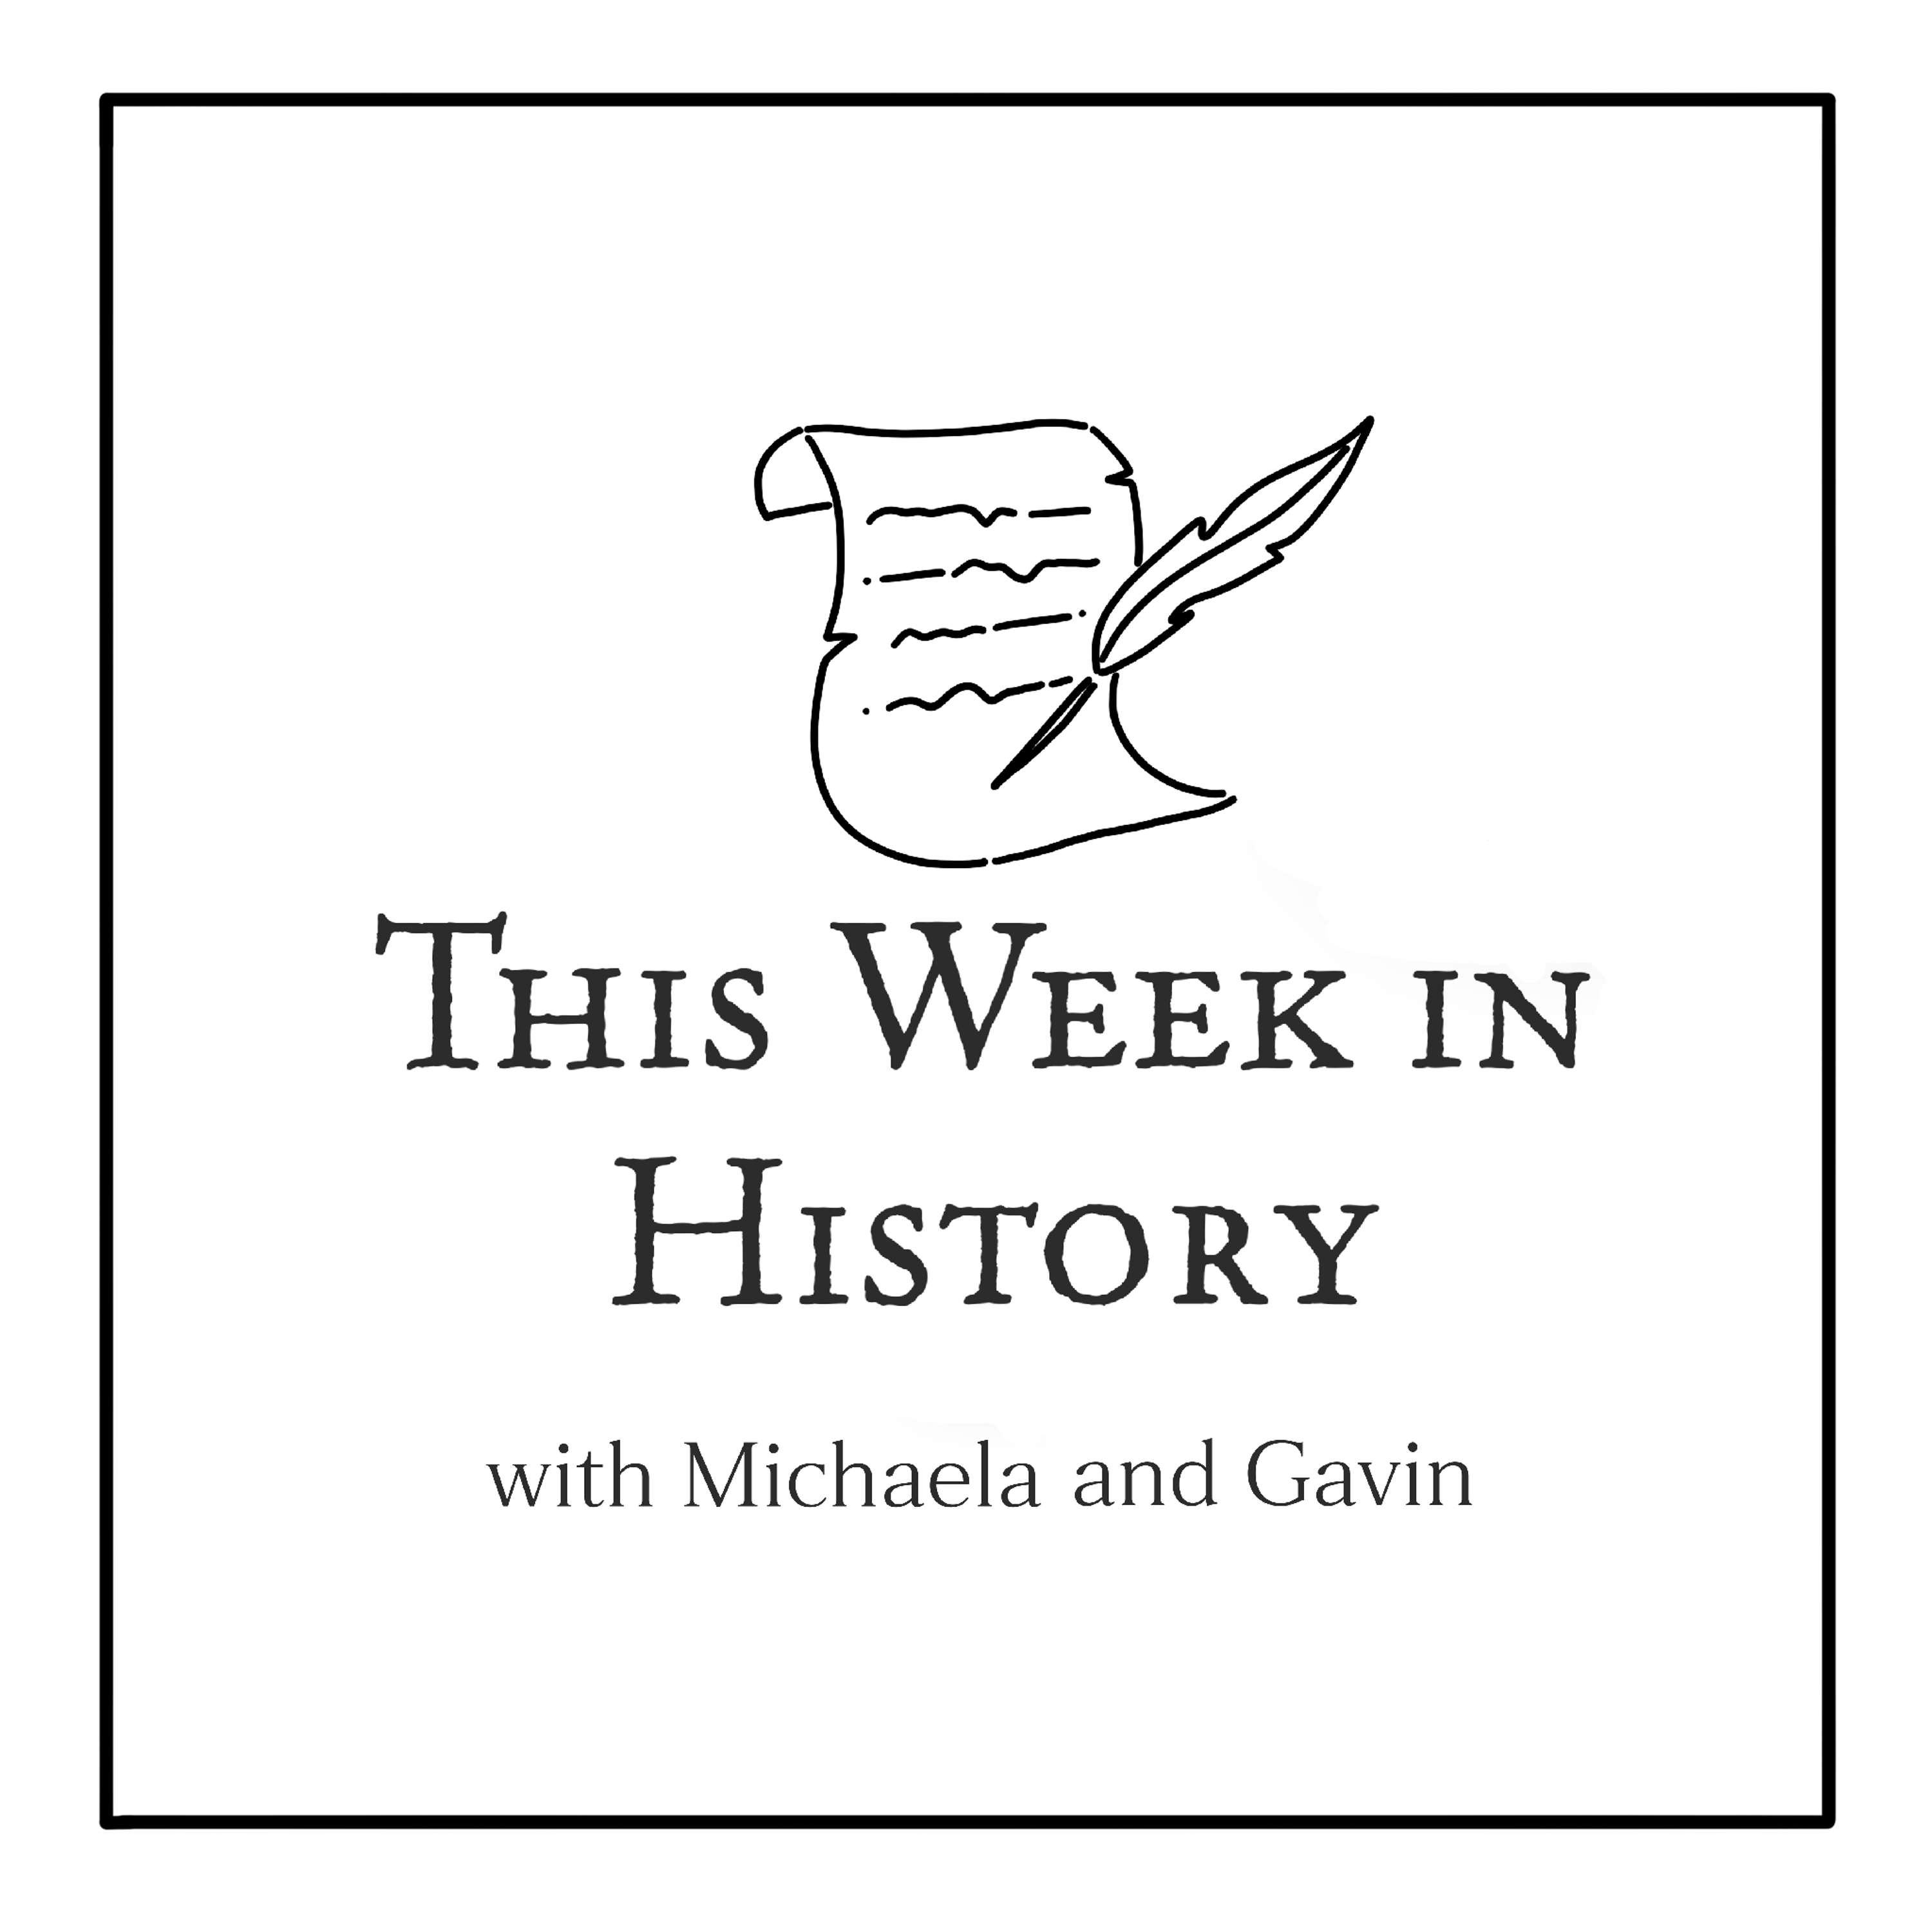 This Week In History with Michaela and Gavin: July 21-27